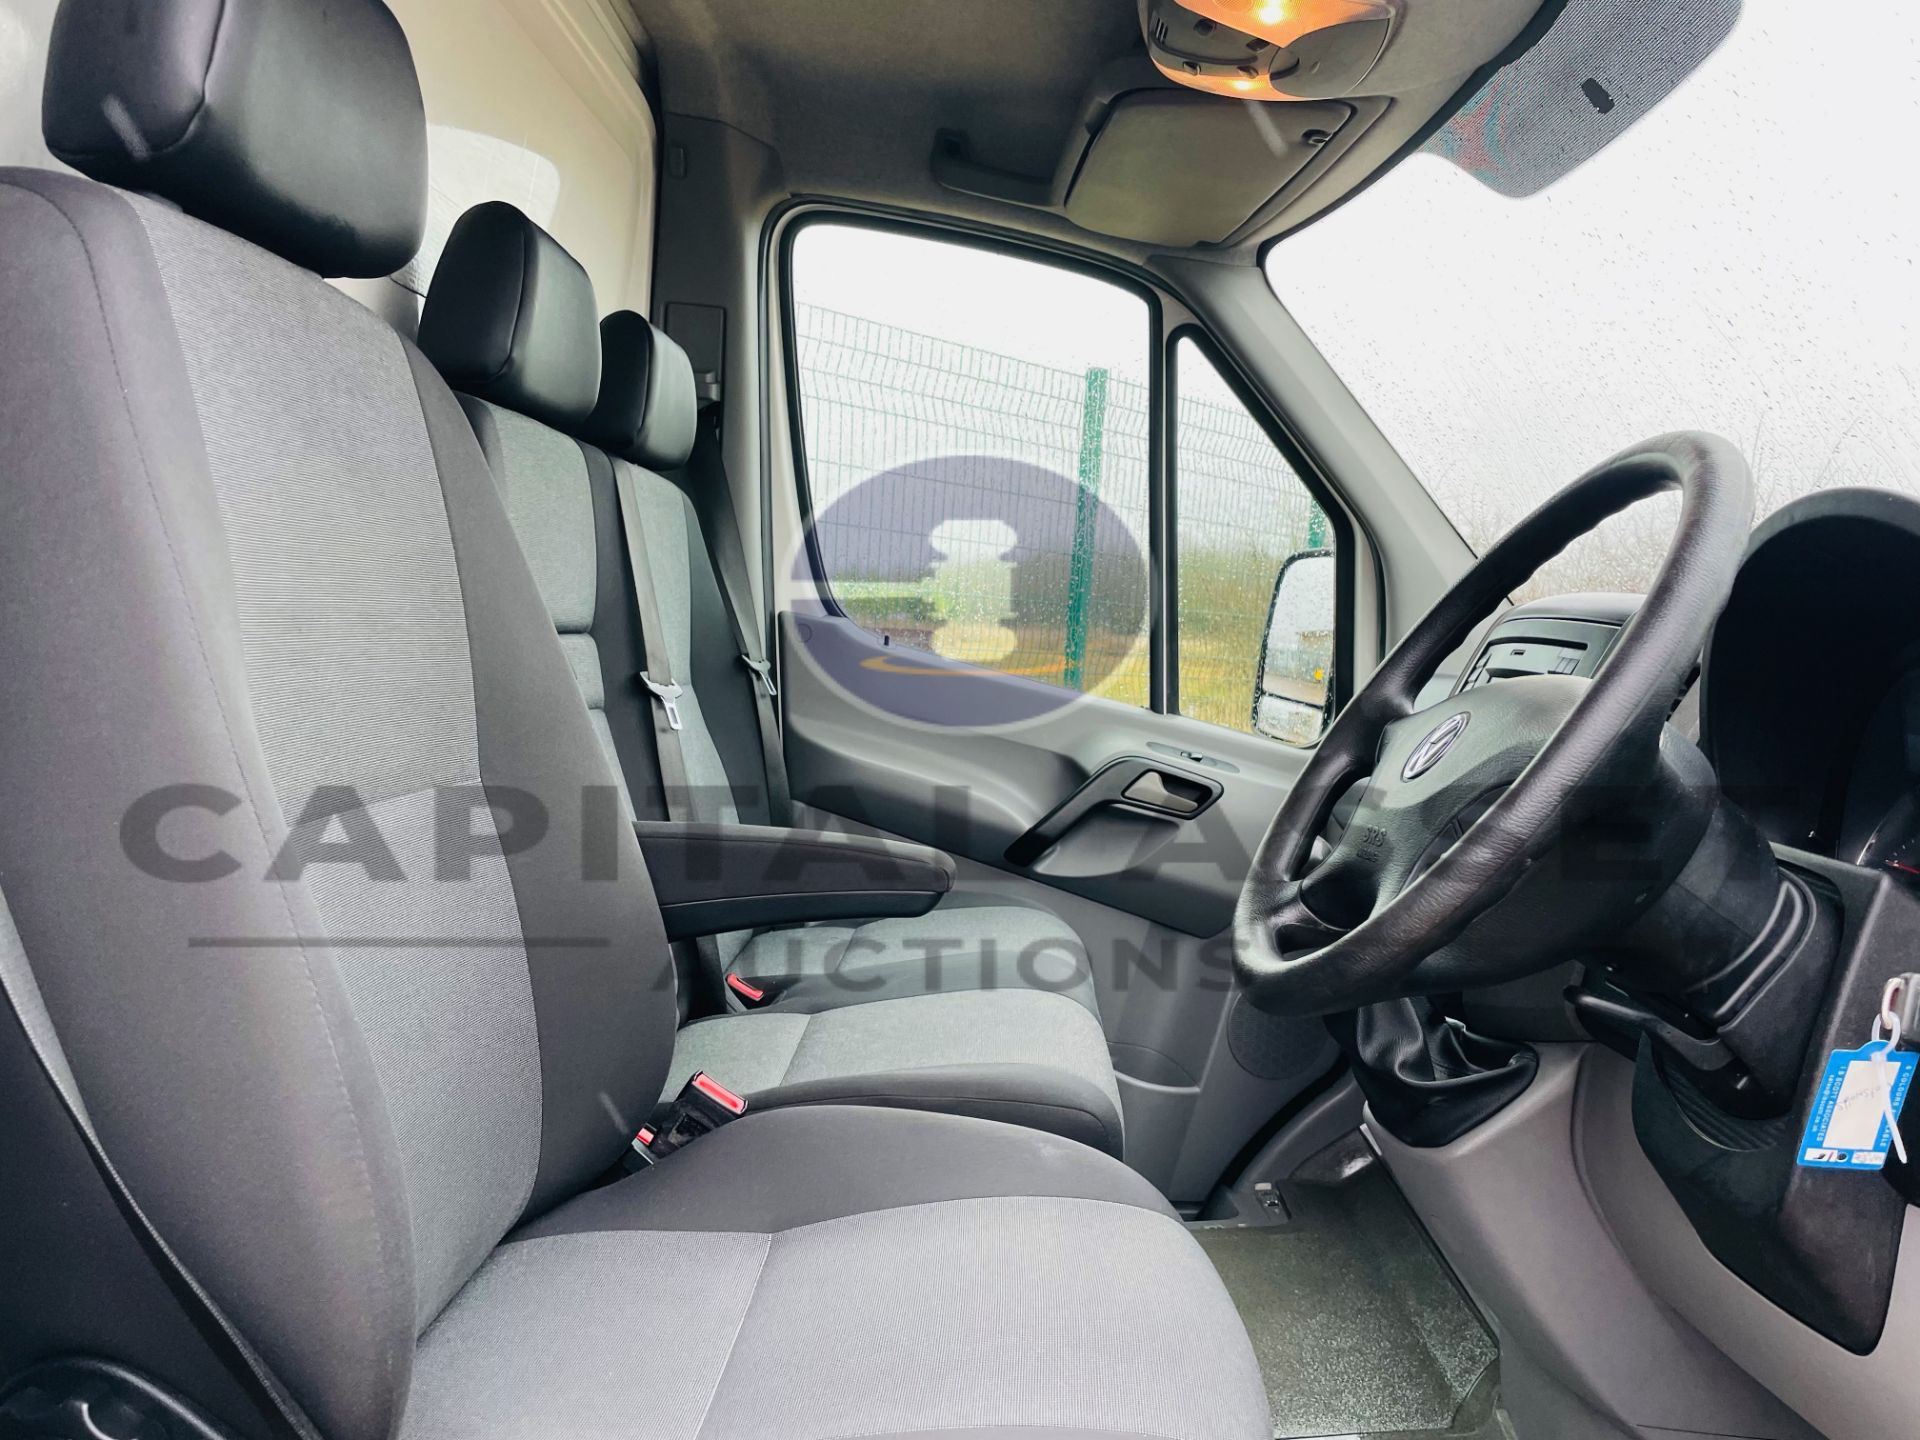 (On Sale) VOLKSWAGEN CRAFTER CR35 *LWB - DROPSIDE TRUCK* (2017 - EURO 6) '6 SPEED - STOP / START' - Image 24 of 39